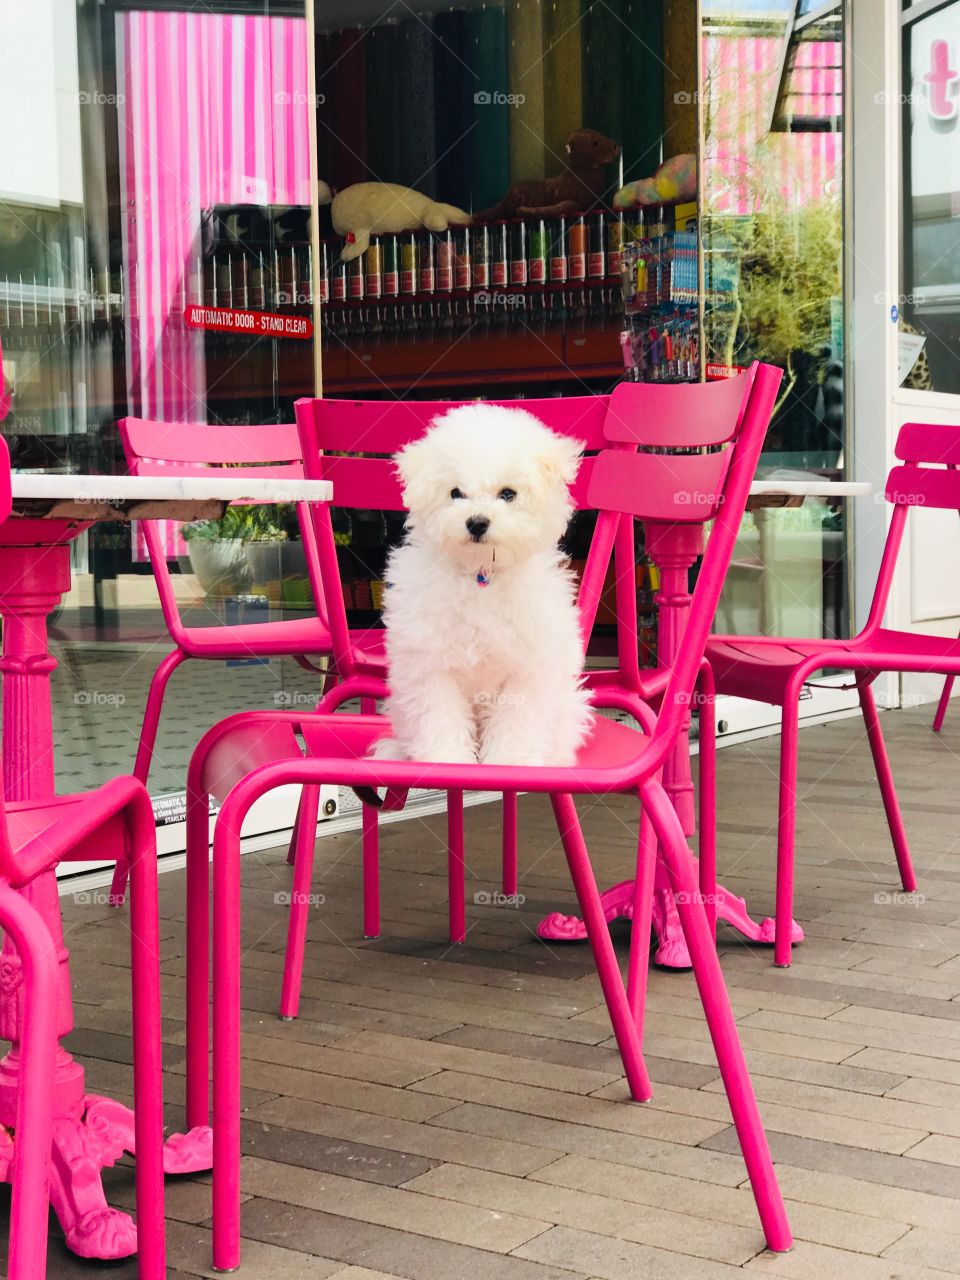 A fluffy white puppy dog perched on a hot pink chair amongst other matching chairs in front of a shop.